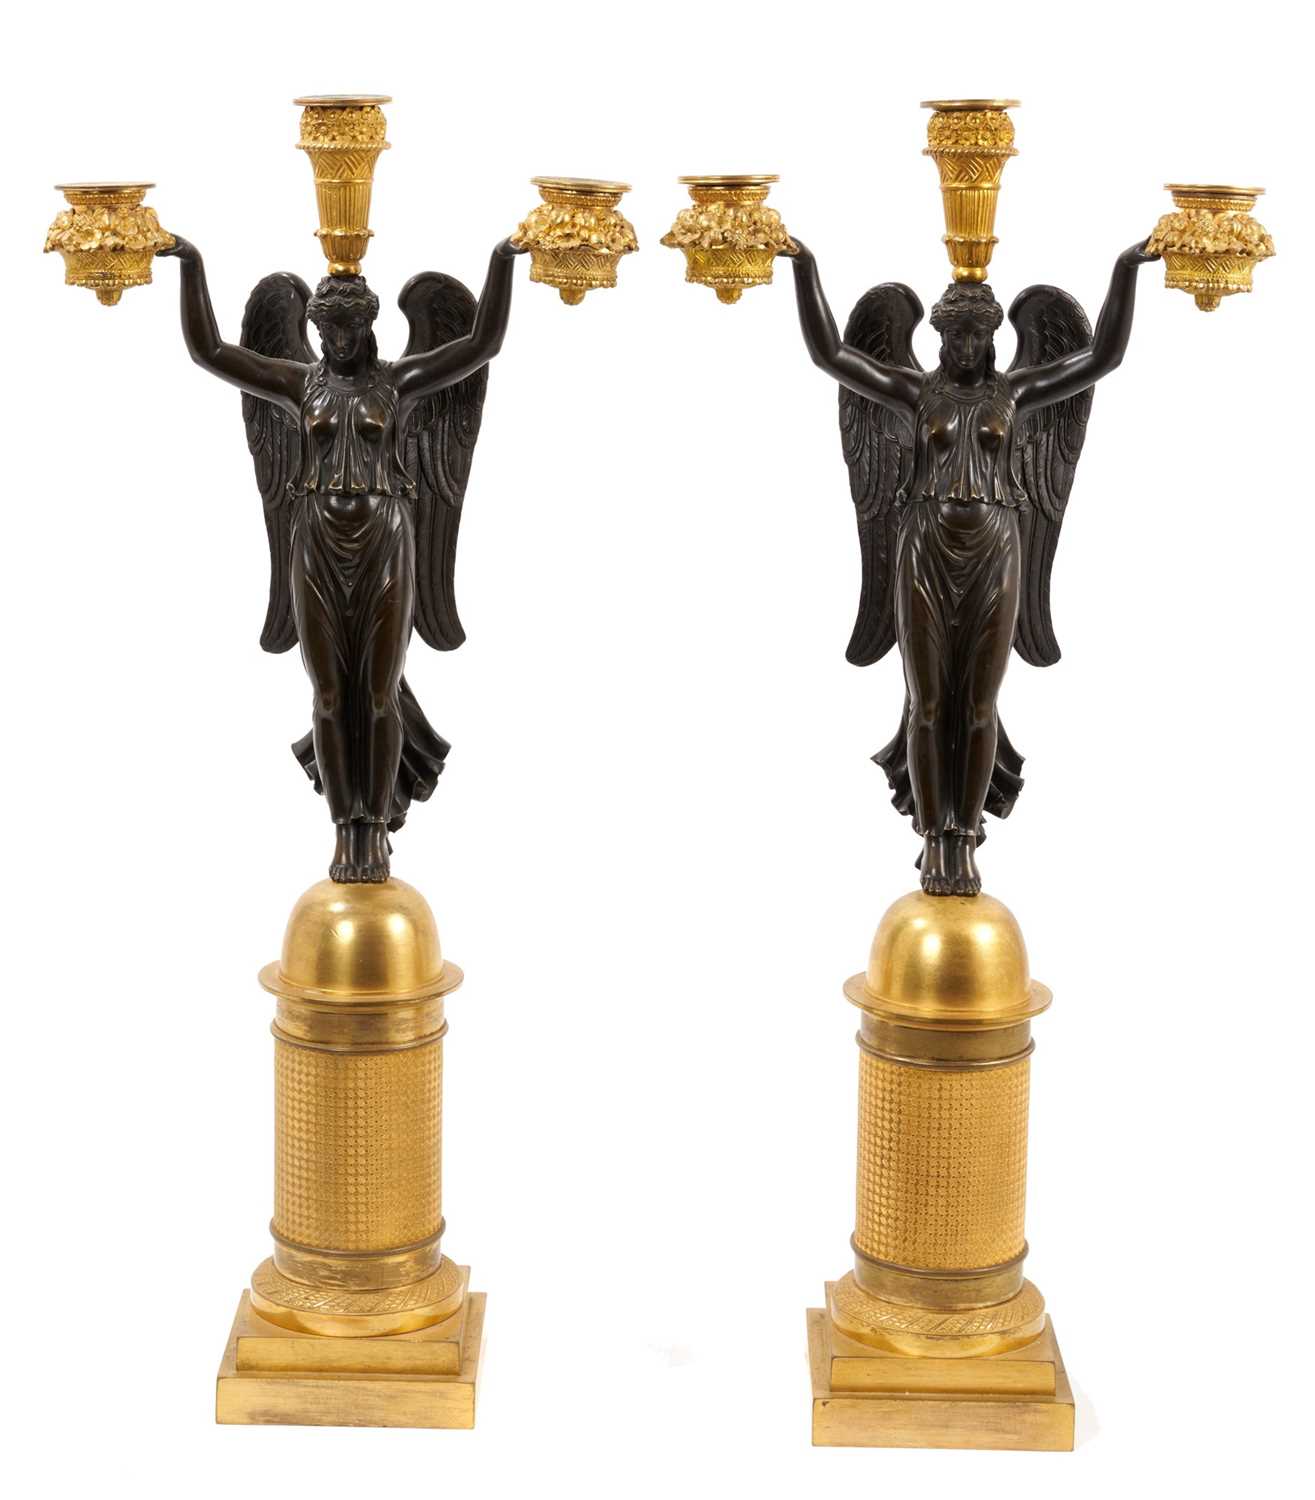 Lot 901 - Pair of fine quality early 19th century gilt bronze and patinated bronze figural candelabra